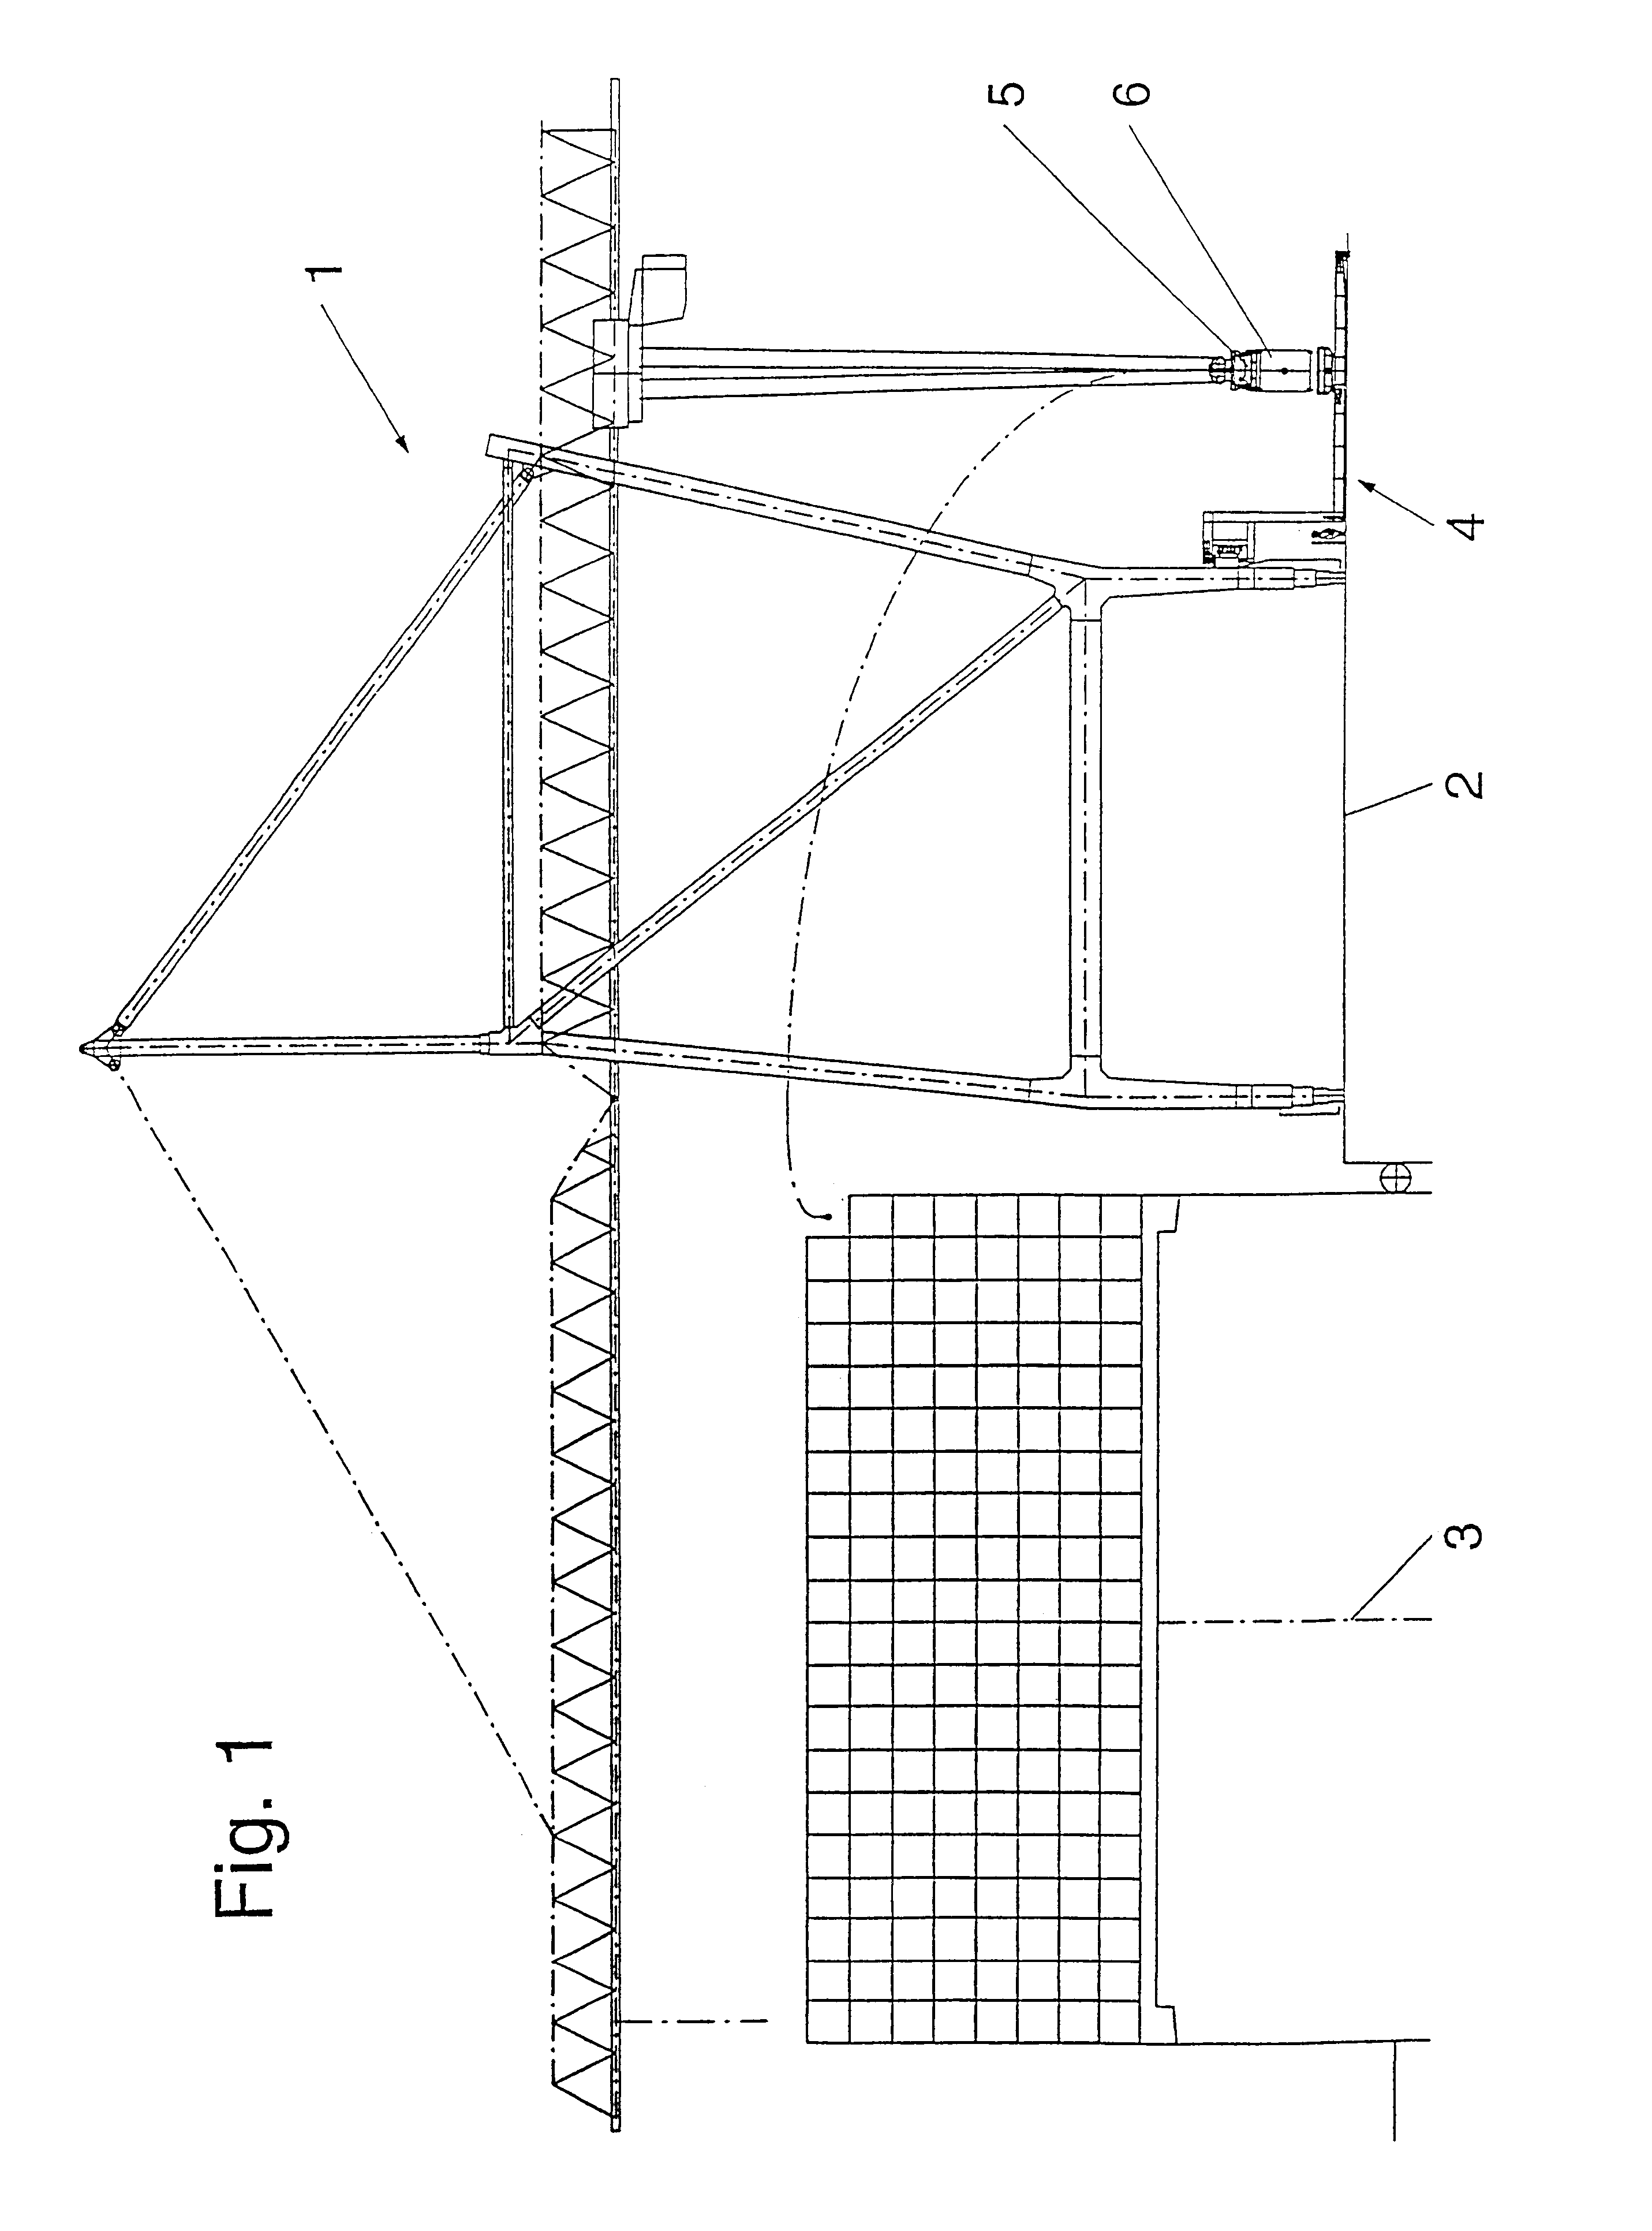 Loading device for ISO containers